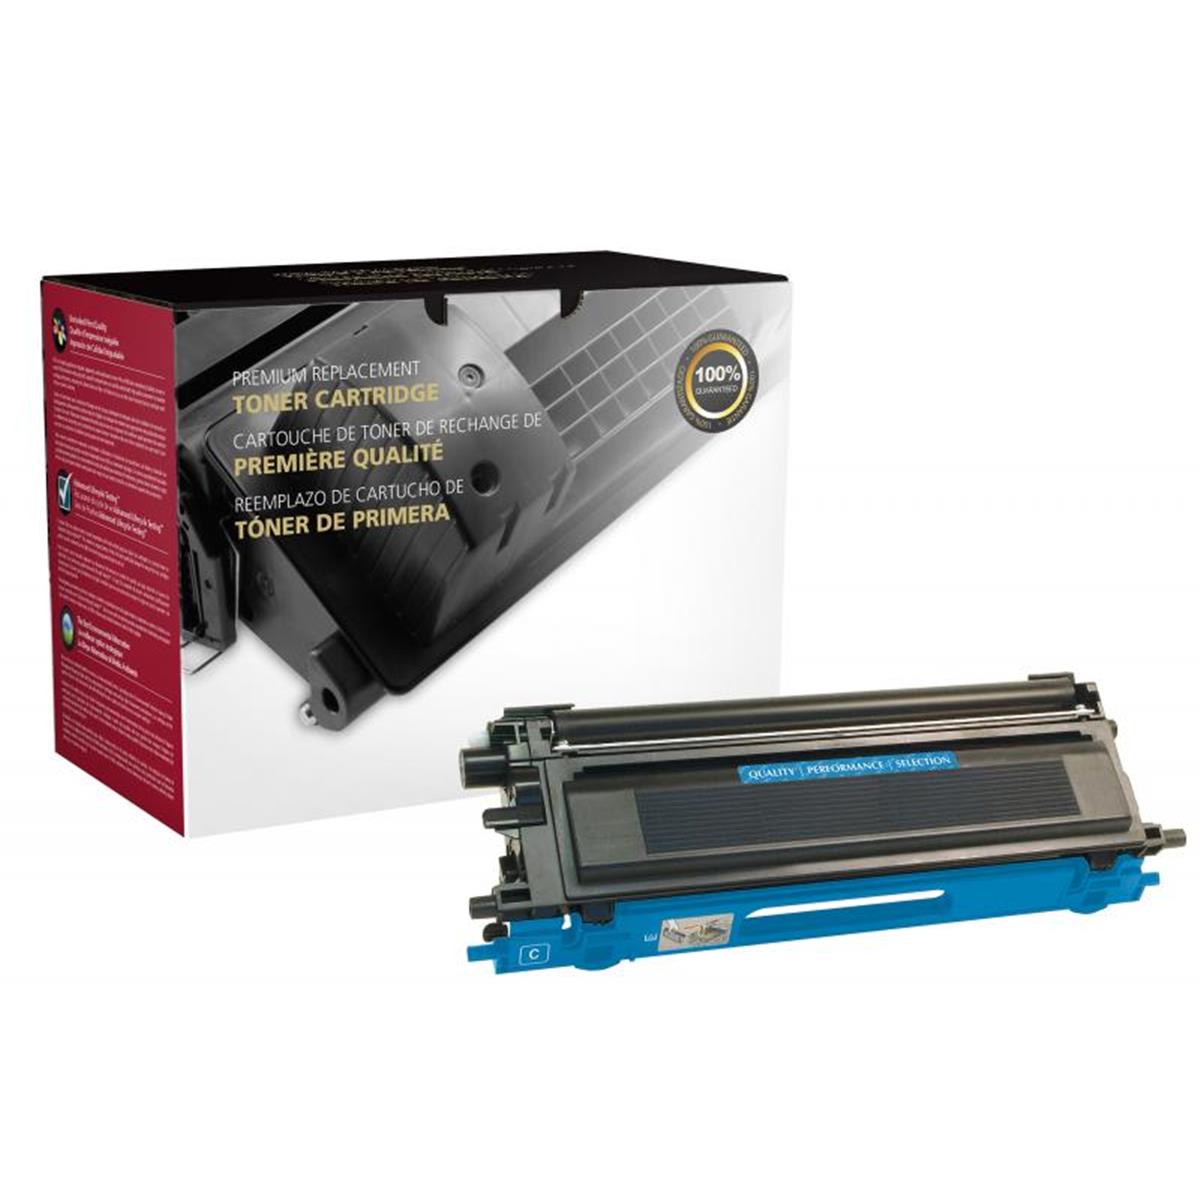 Picture of Brother 200494 Cyan Toner Cartridge for TN110